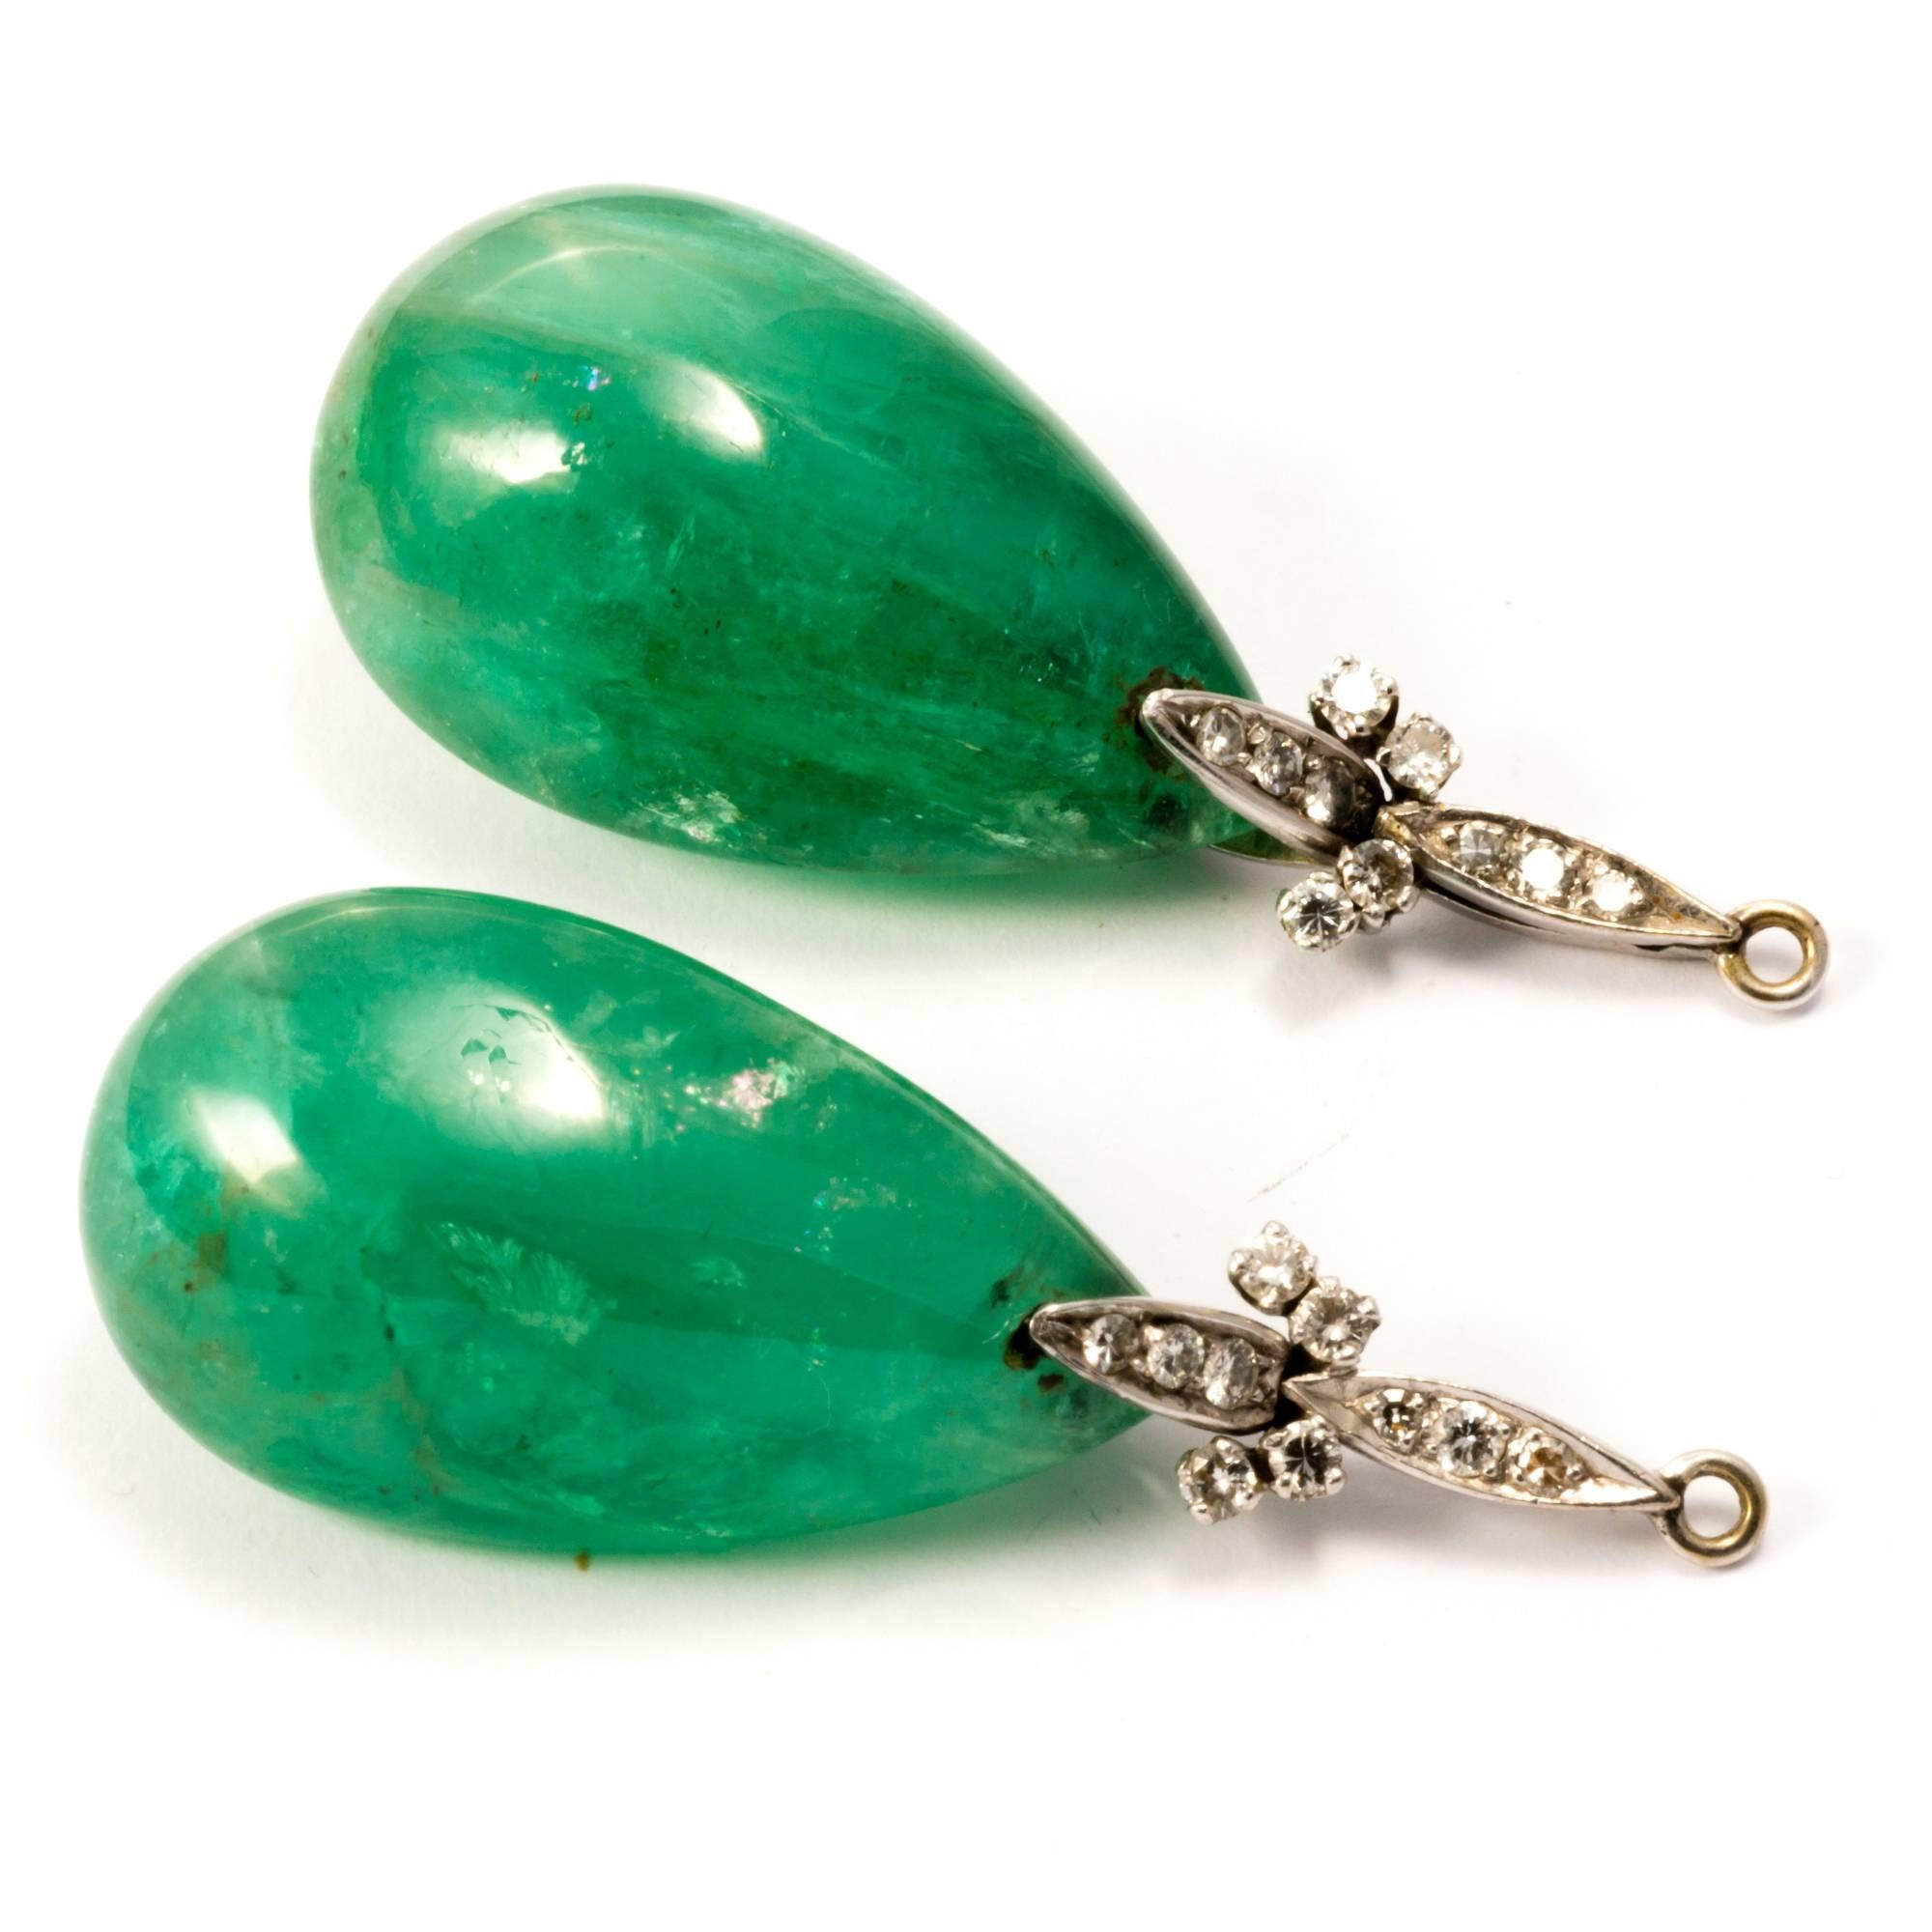 Vintage and unique, these original earrings from 1920's are truly amazing! Featuring 2 large emerald drops (weighing 40 carats each!) that are a wonder of nature, the design and manufacture of this high-jewelry earrings perfectly represents the art